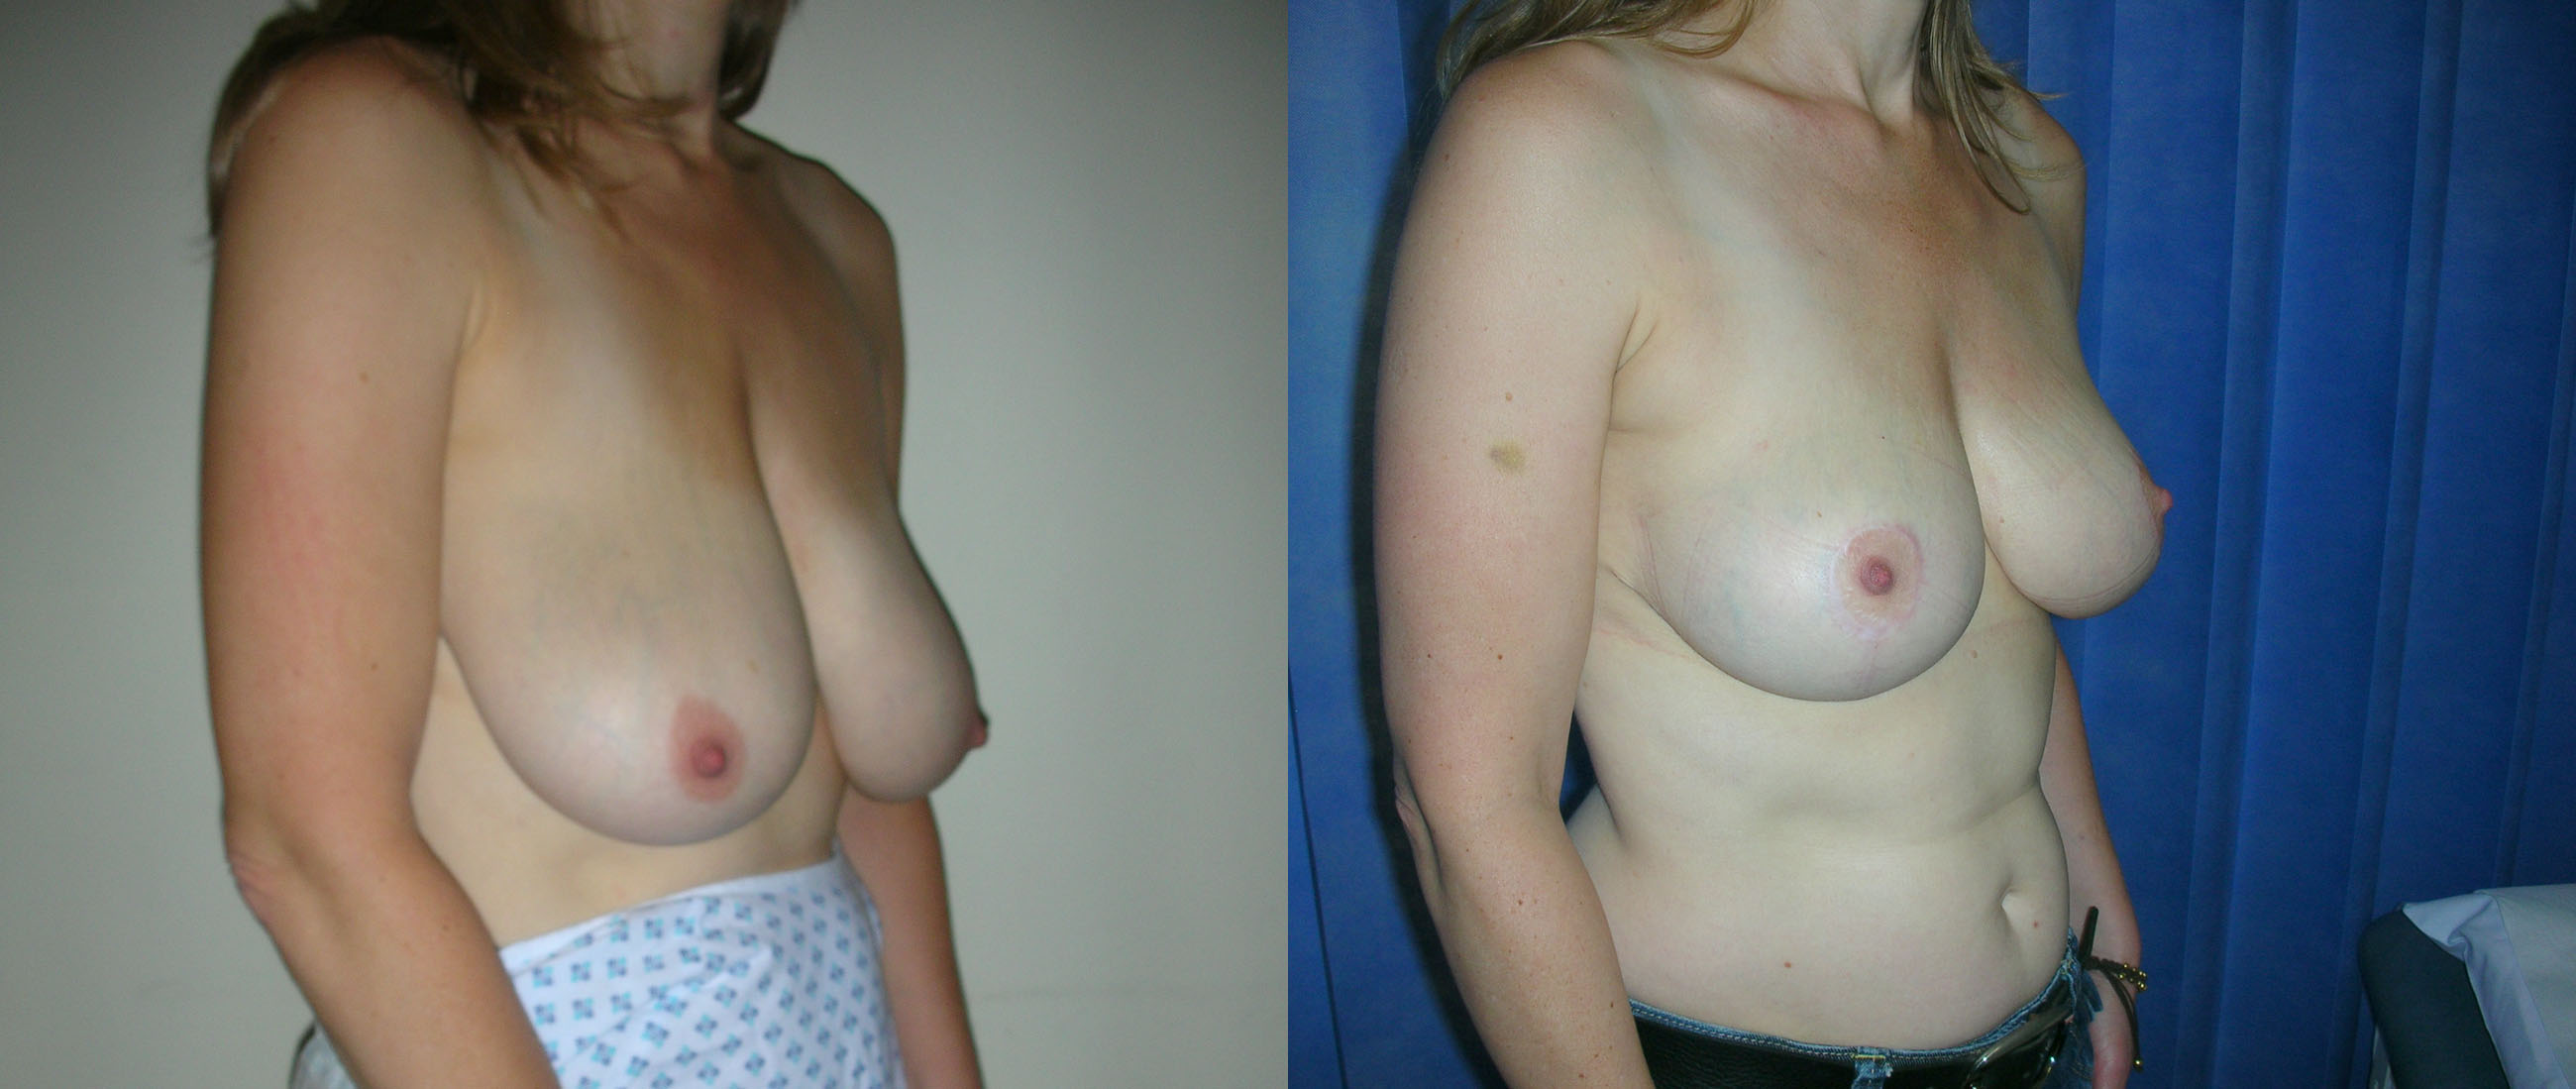 Breast Reduction Before and Afters